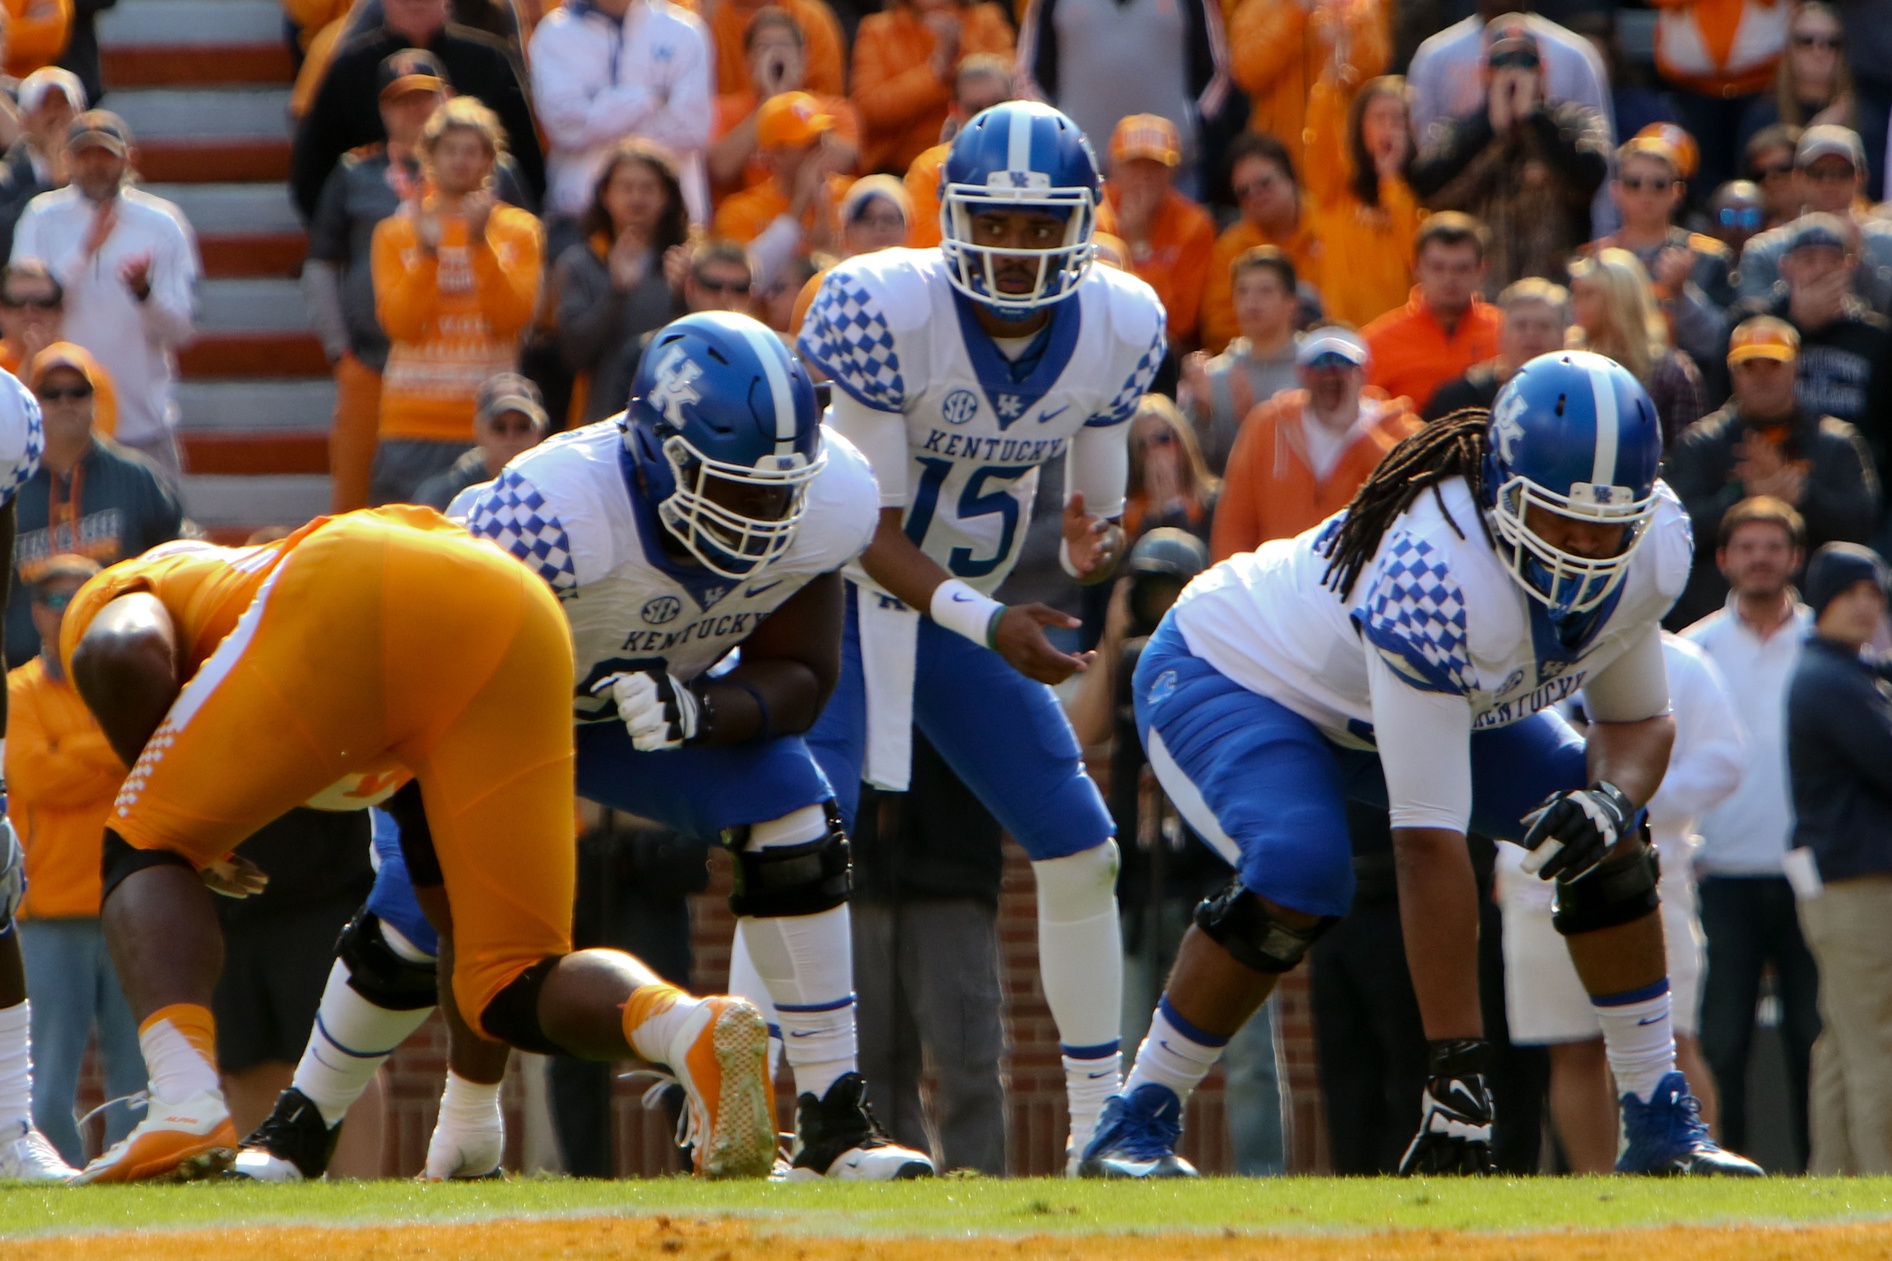 Nov 12, 2016; Knoxville, TN, USA; Kentucky Wildcats quarterback Stephen  Johnson (15) during the first half against the Tennessee Volunteers at Neyland Stadium. Mandatory Credit: Randy Sartin-USA TODAY Sports